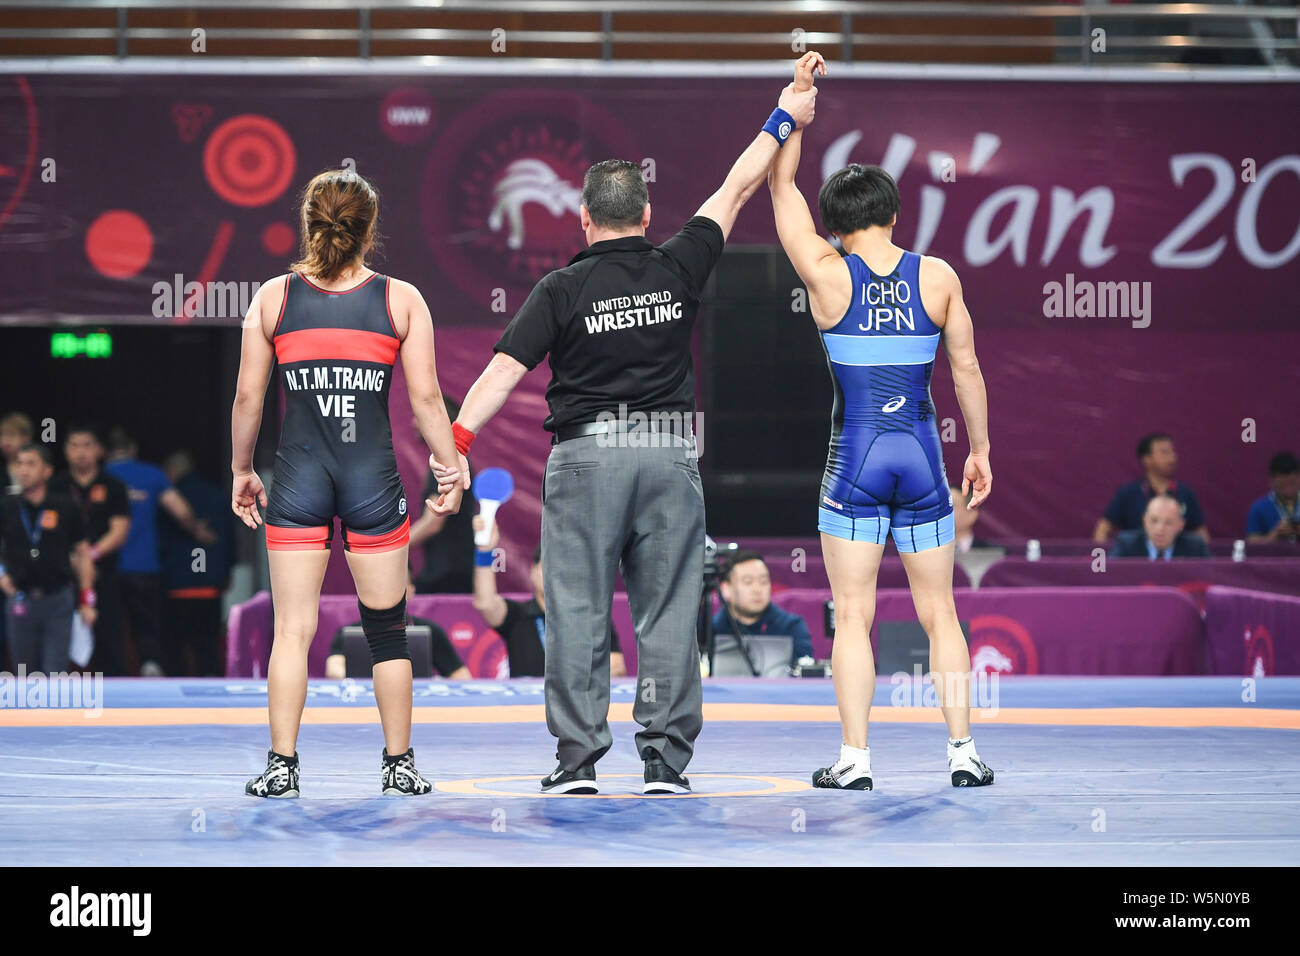 Kaori Icho of Japan, right, is announced as the winner by the referee after defeating N.T.M. Trang of Vietnam in the women's 57kg wrestling during the Stock Photo